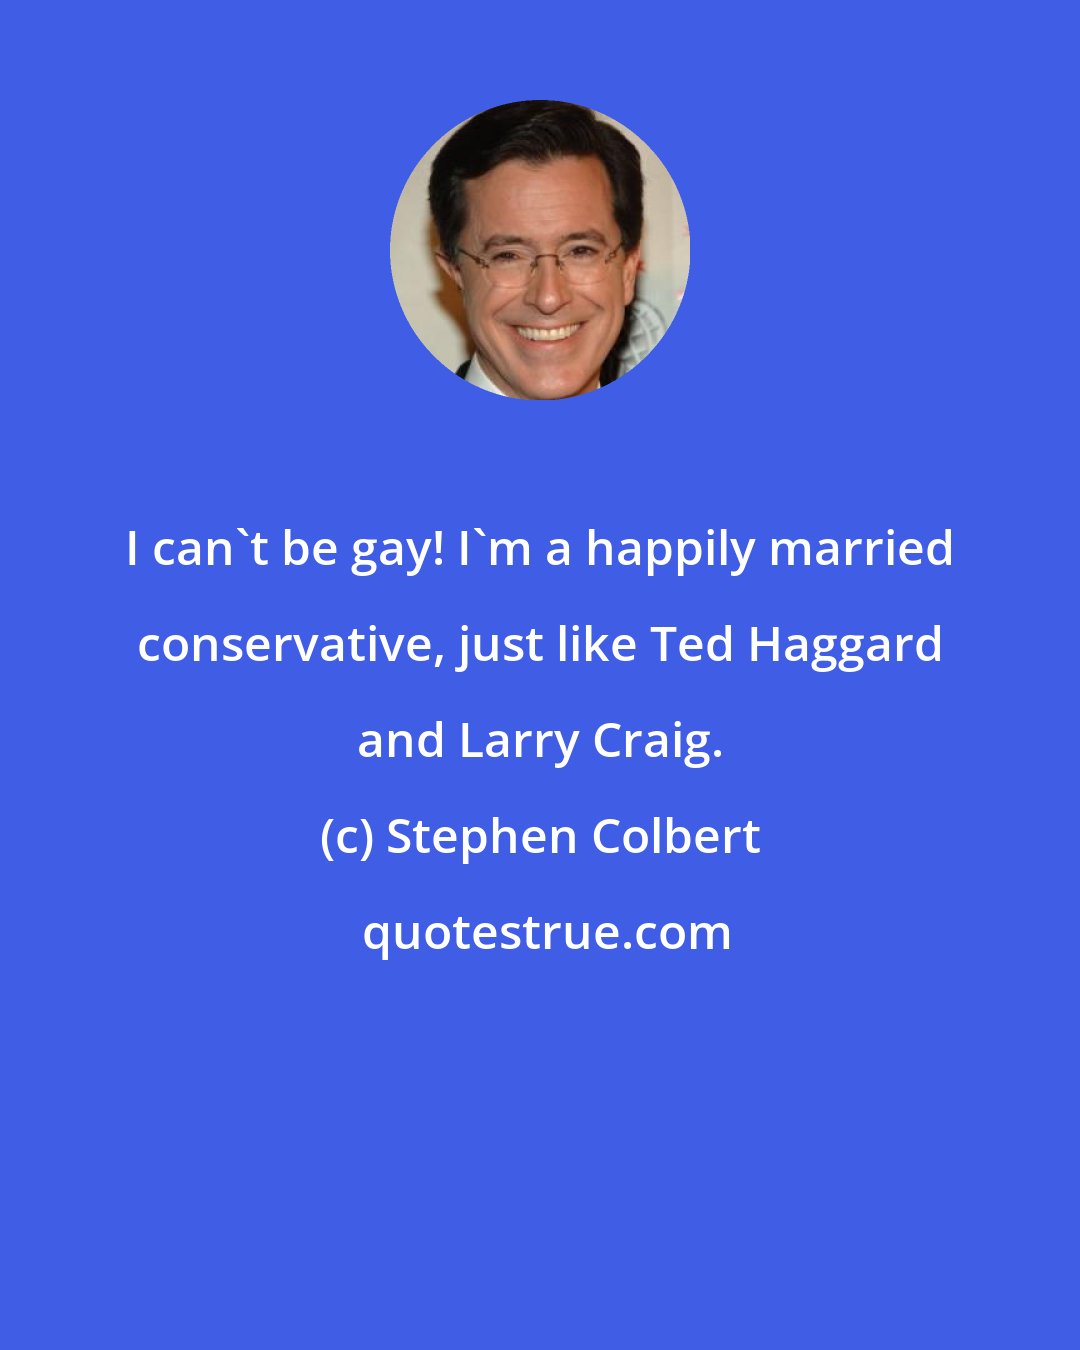 Stephen Colbert: I can't be gay! I'm a happily married conservative, just like Ted Haggard and Larry Craig.